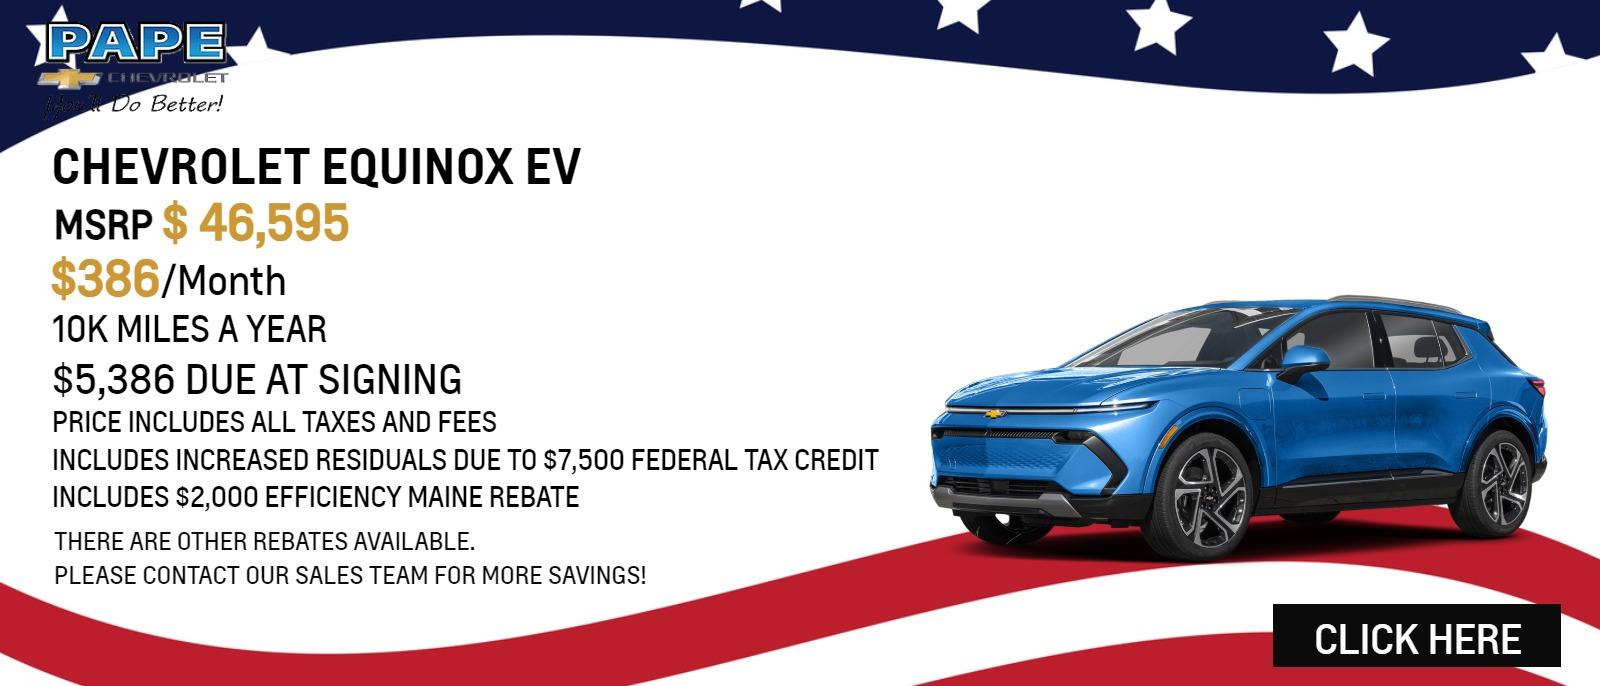 EQUINOX EV
- MSRP $46,595
- $386/MONTH
- 10K MILES A YEAR
- $5,386 DUE AT SIGNING
- PRICE INCLUDES ALL TAXES AND FEES
- INCLUDES INCREASED RESIDUALS DUE TO $7,500 FEDERAL TAX CREDIT
- INCLUDES $2,000 EFFICIENCY MAINE REBATE

"